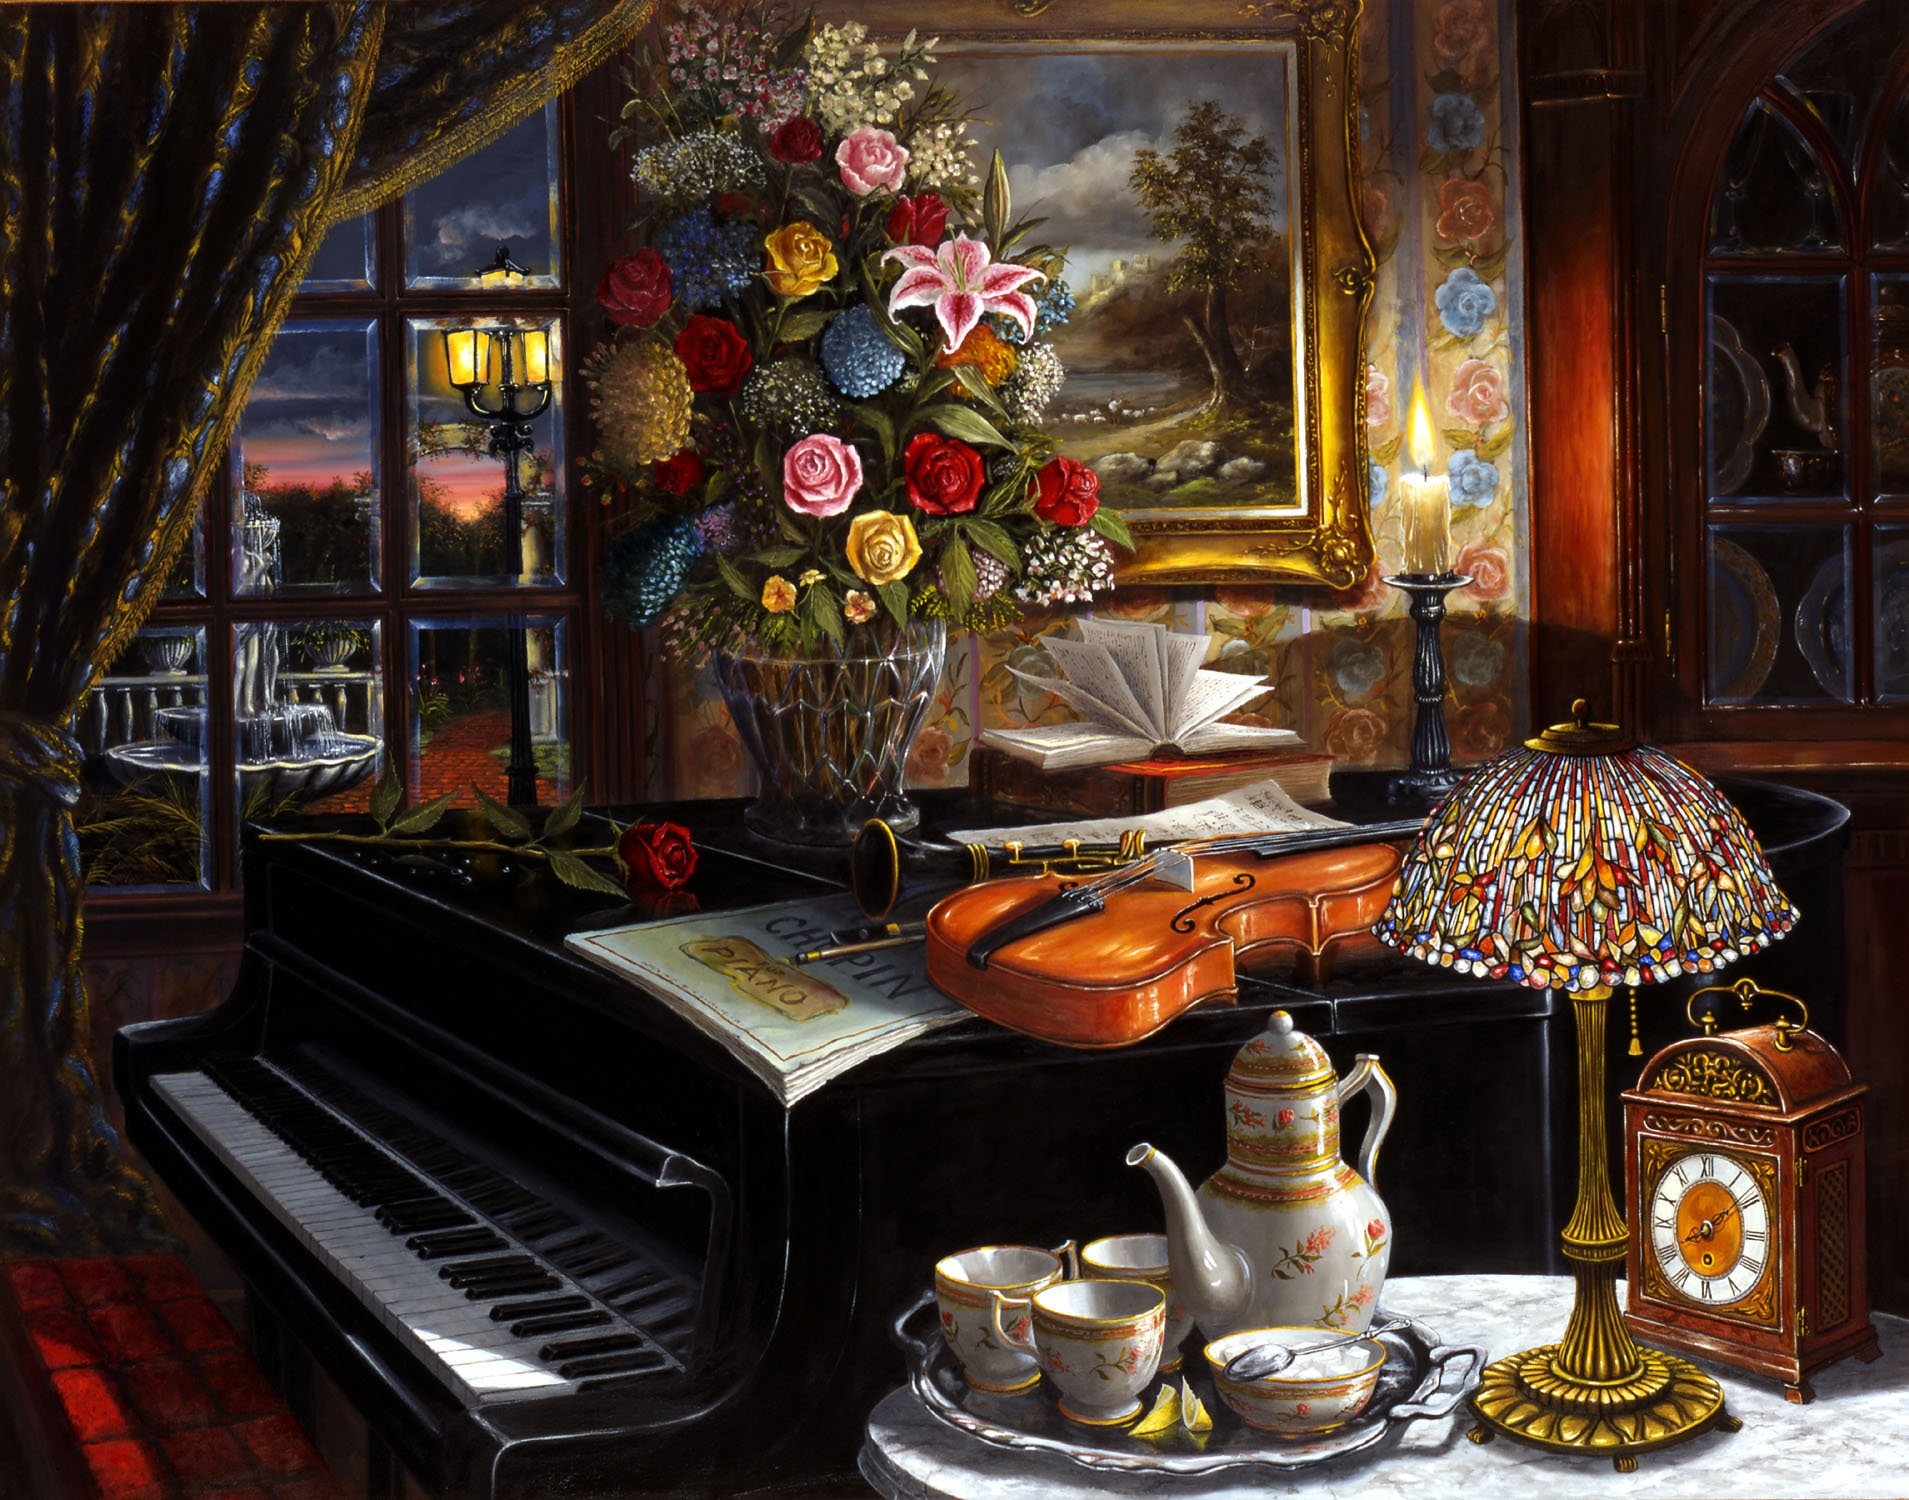 lamp, artistic, painting, candle, clock, flower, living room, piano, violin, window